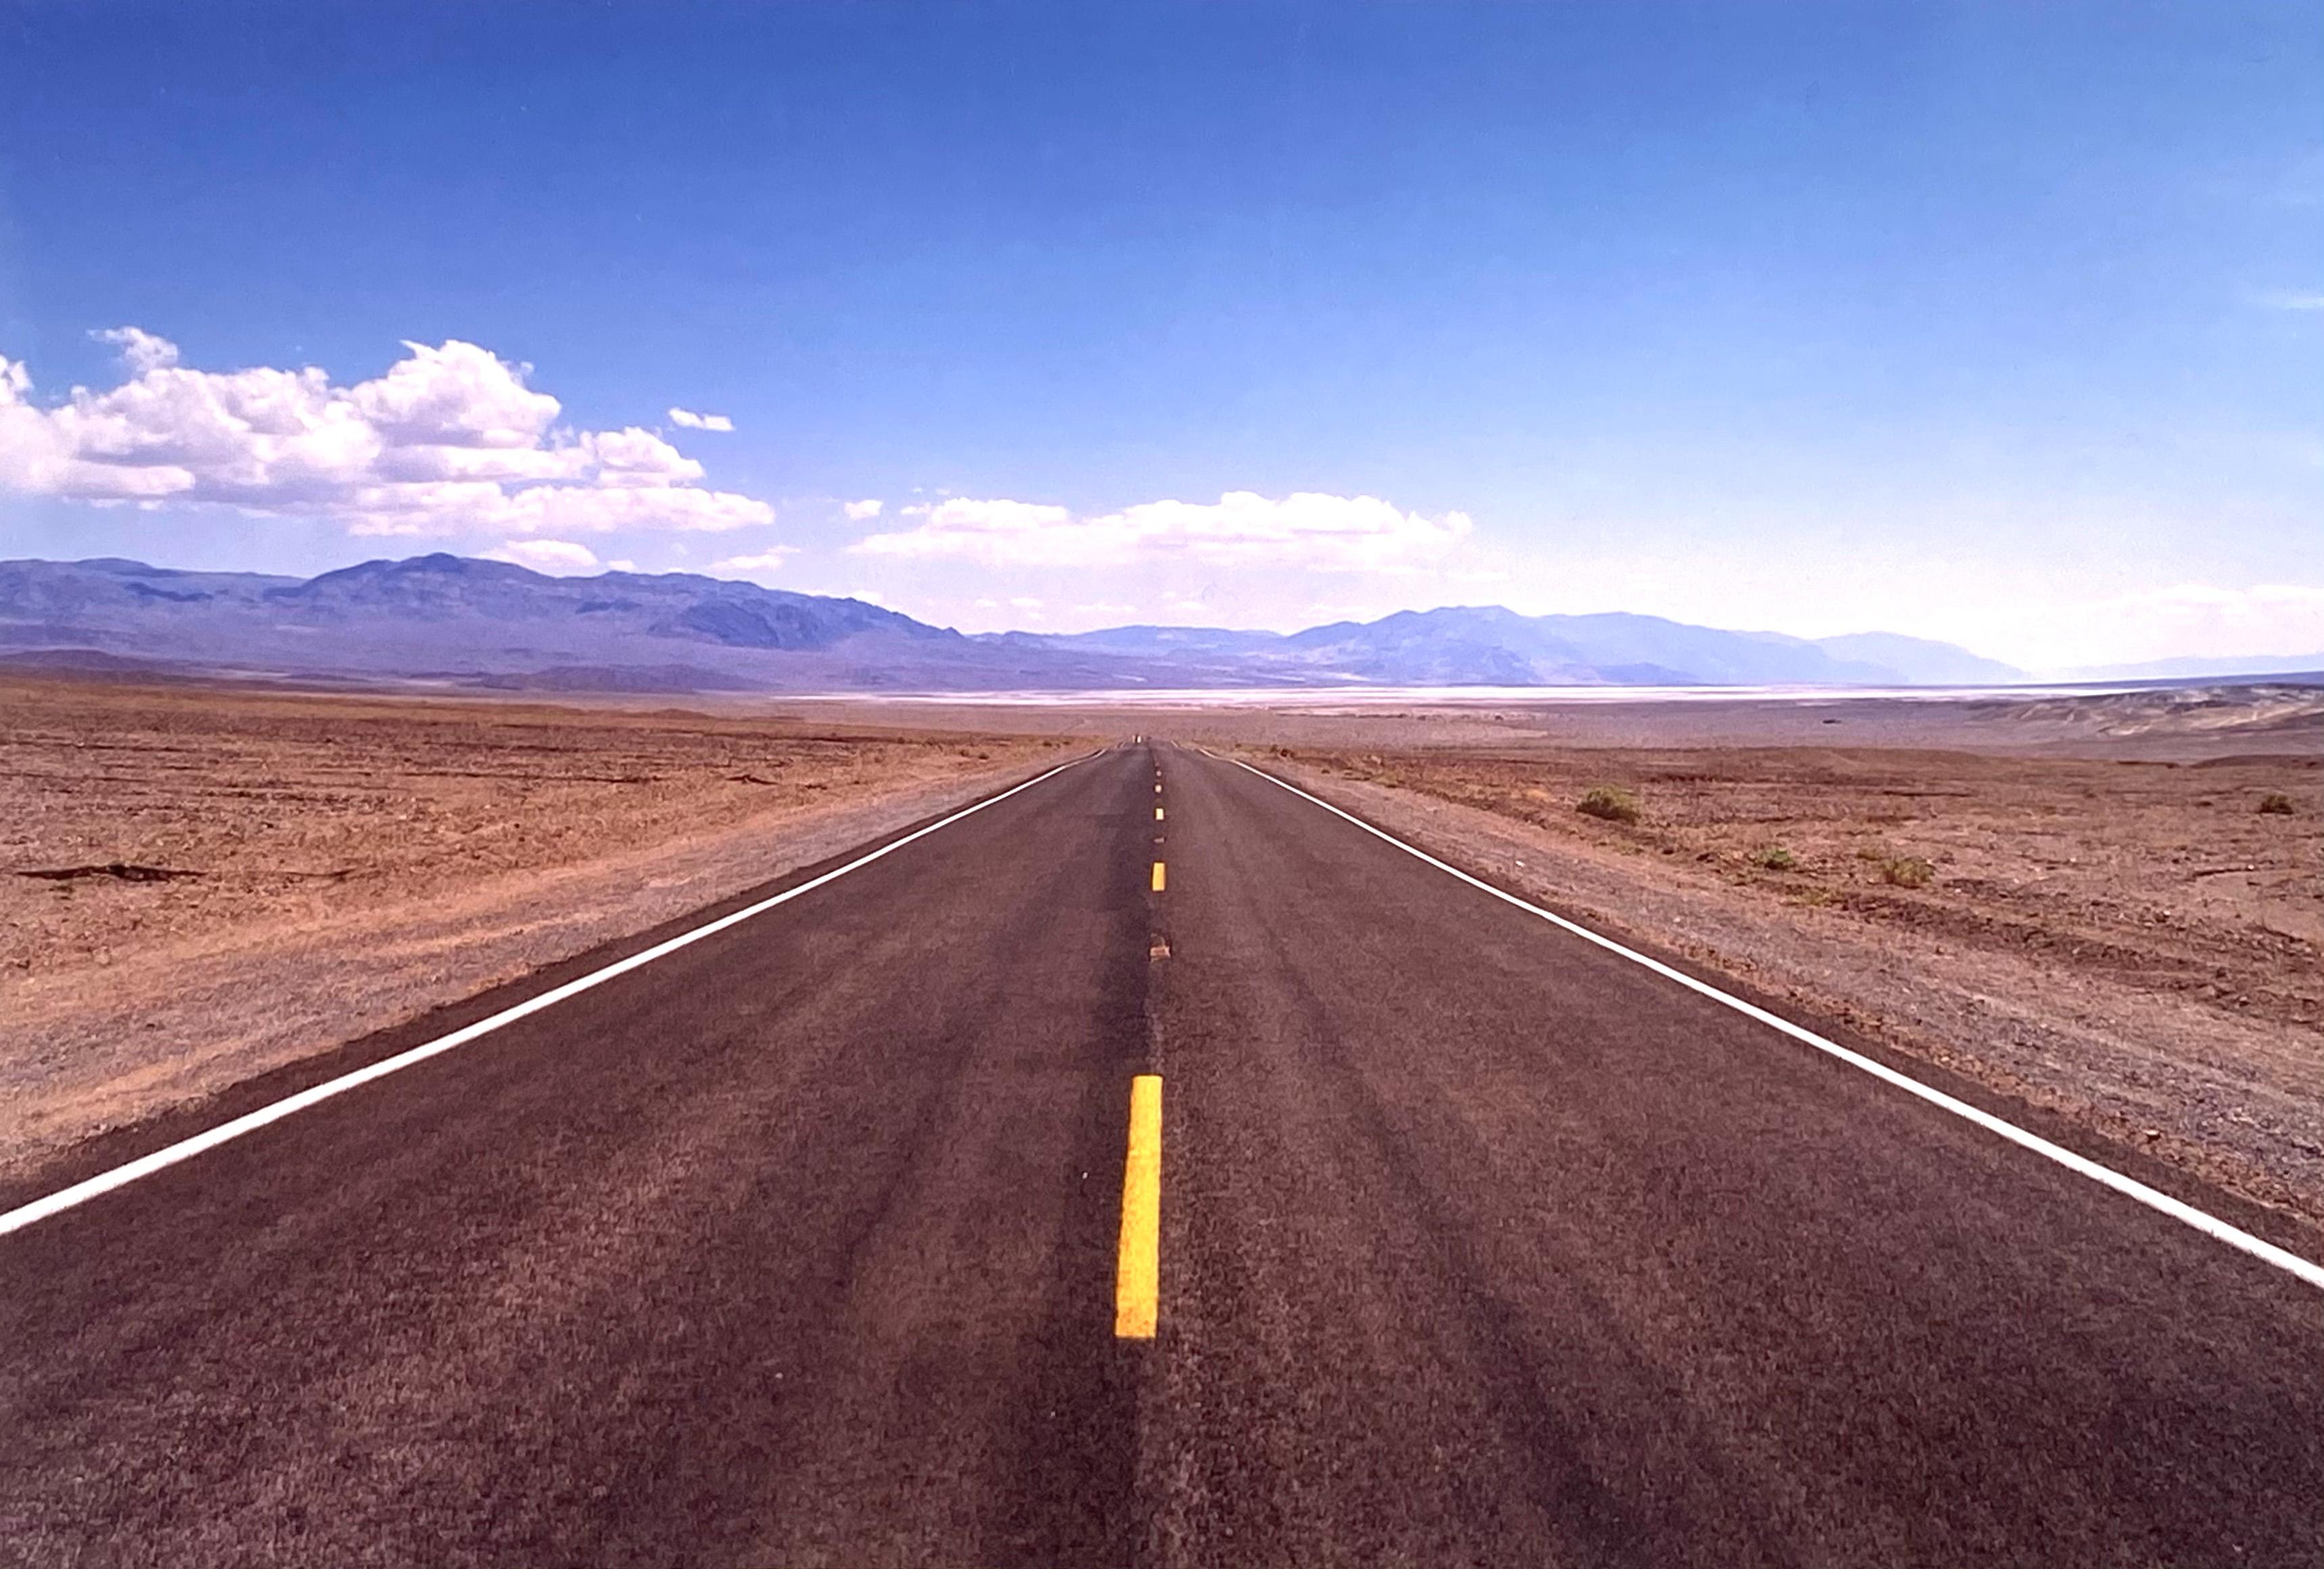 Richard Heeps Landscape Photograph - The Road to Death Valley, Mojave Desert, California - Landscape Color Photo